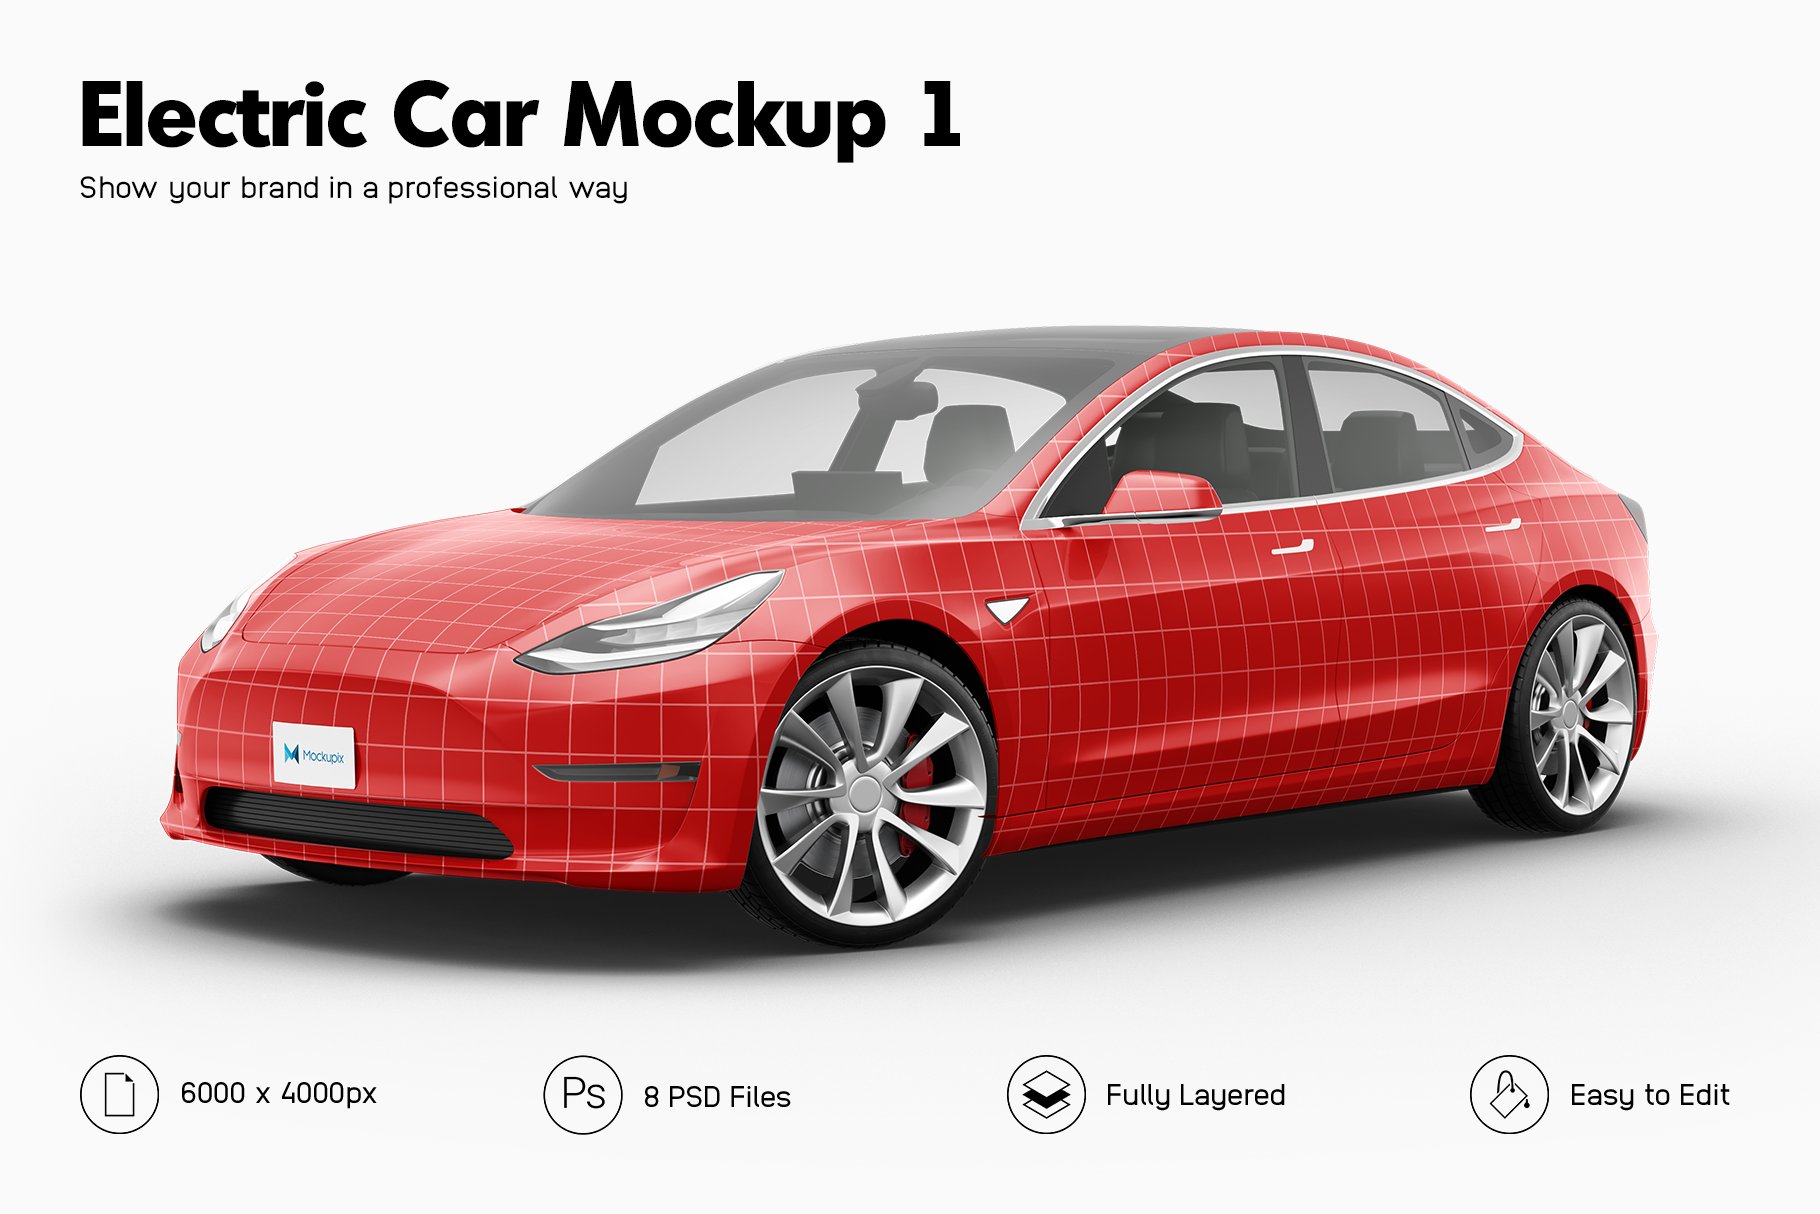 Electric Car Mockup 1 cover image.